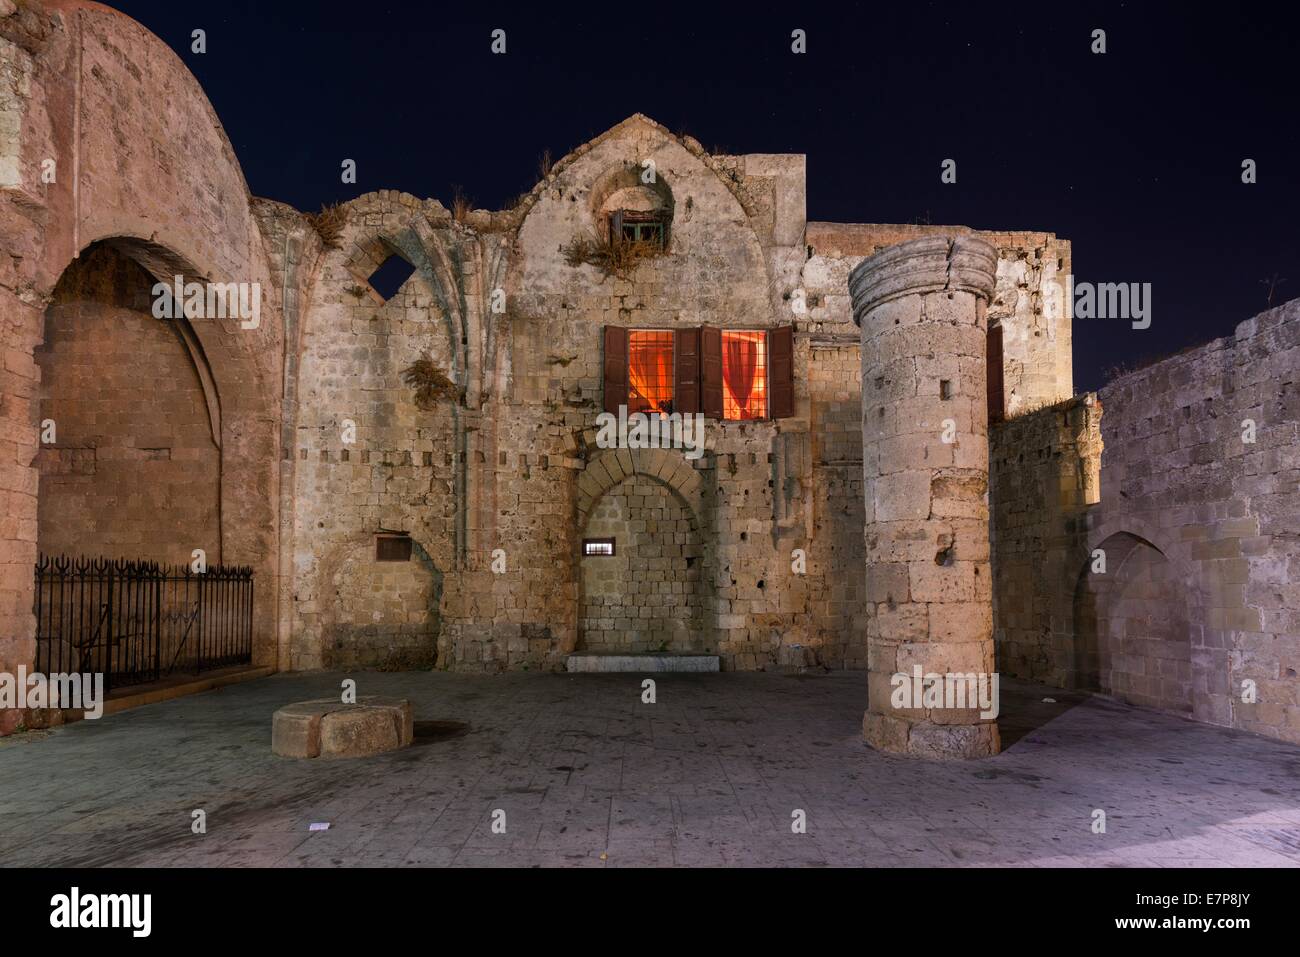 Old Basilica at Ippocratous square of Rhodes island in Greece Stock Photo